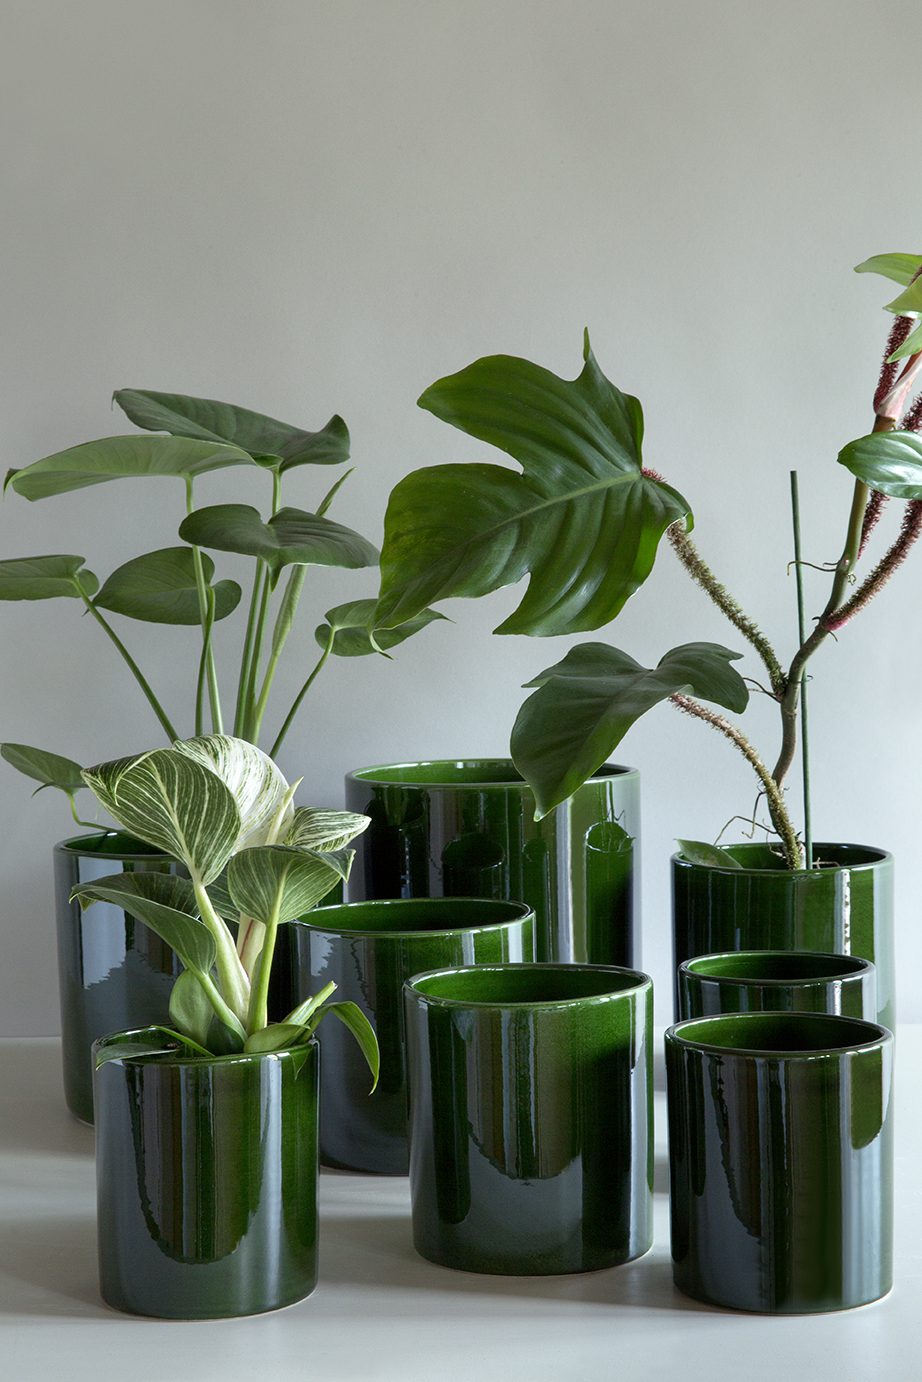 Collection of cylindrical glazed green pots in different sizes.